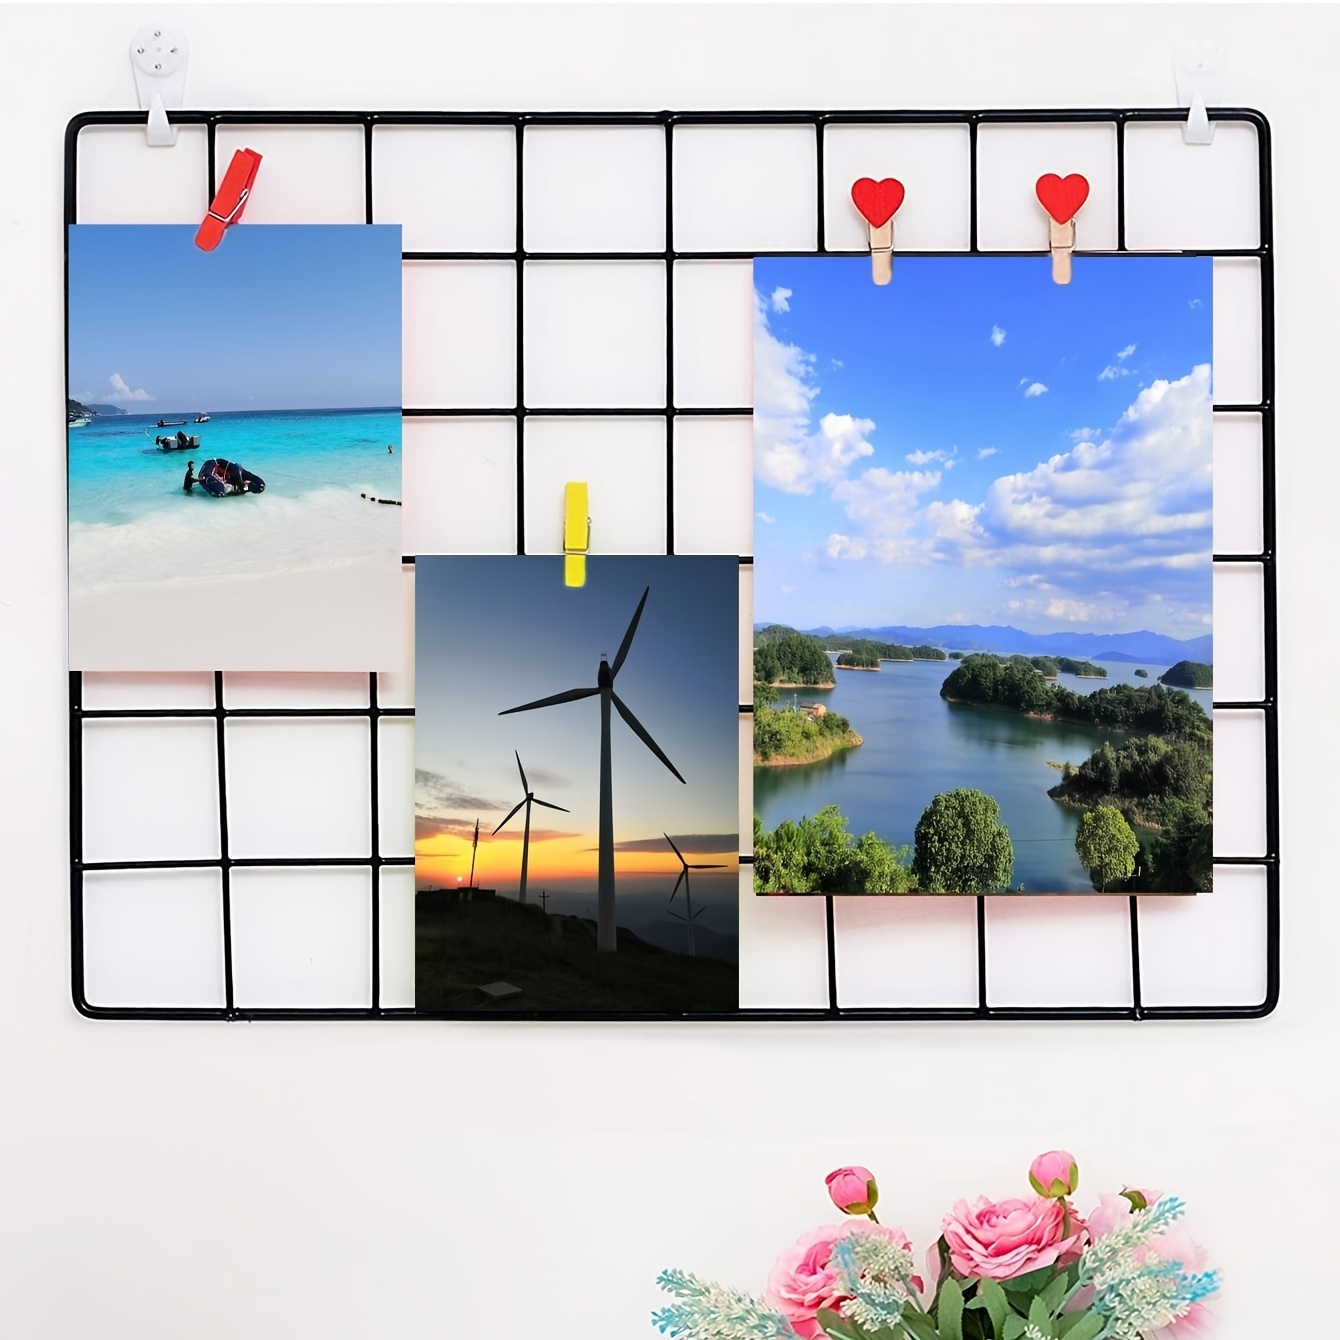 

1pc Wall Grid Panel For Photo Display, Wall Hanging Rack, Wire Wall Grid Panel, Metal Wall Storage Organizer 40x30cm/16x12inch